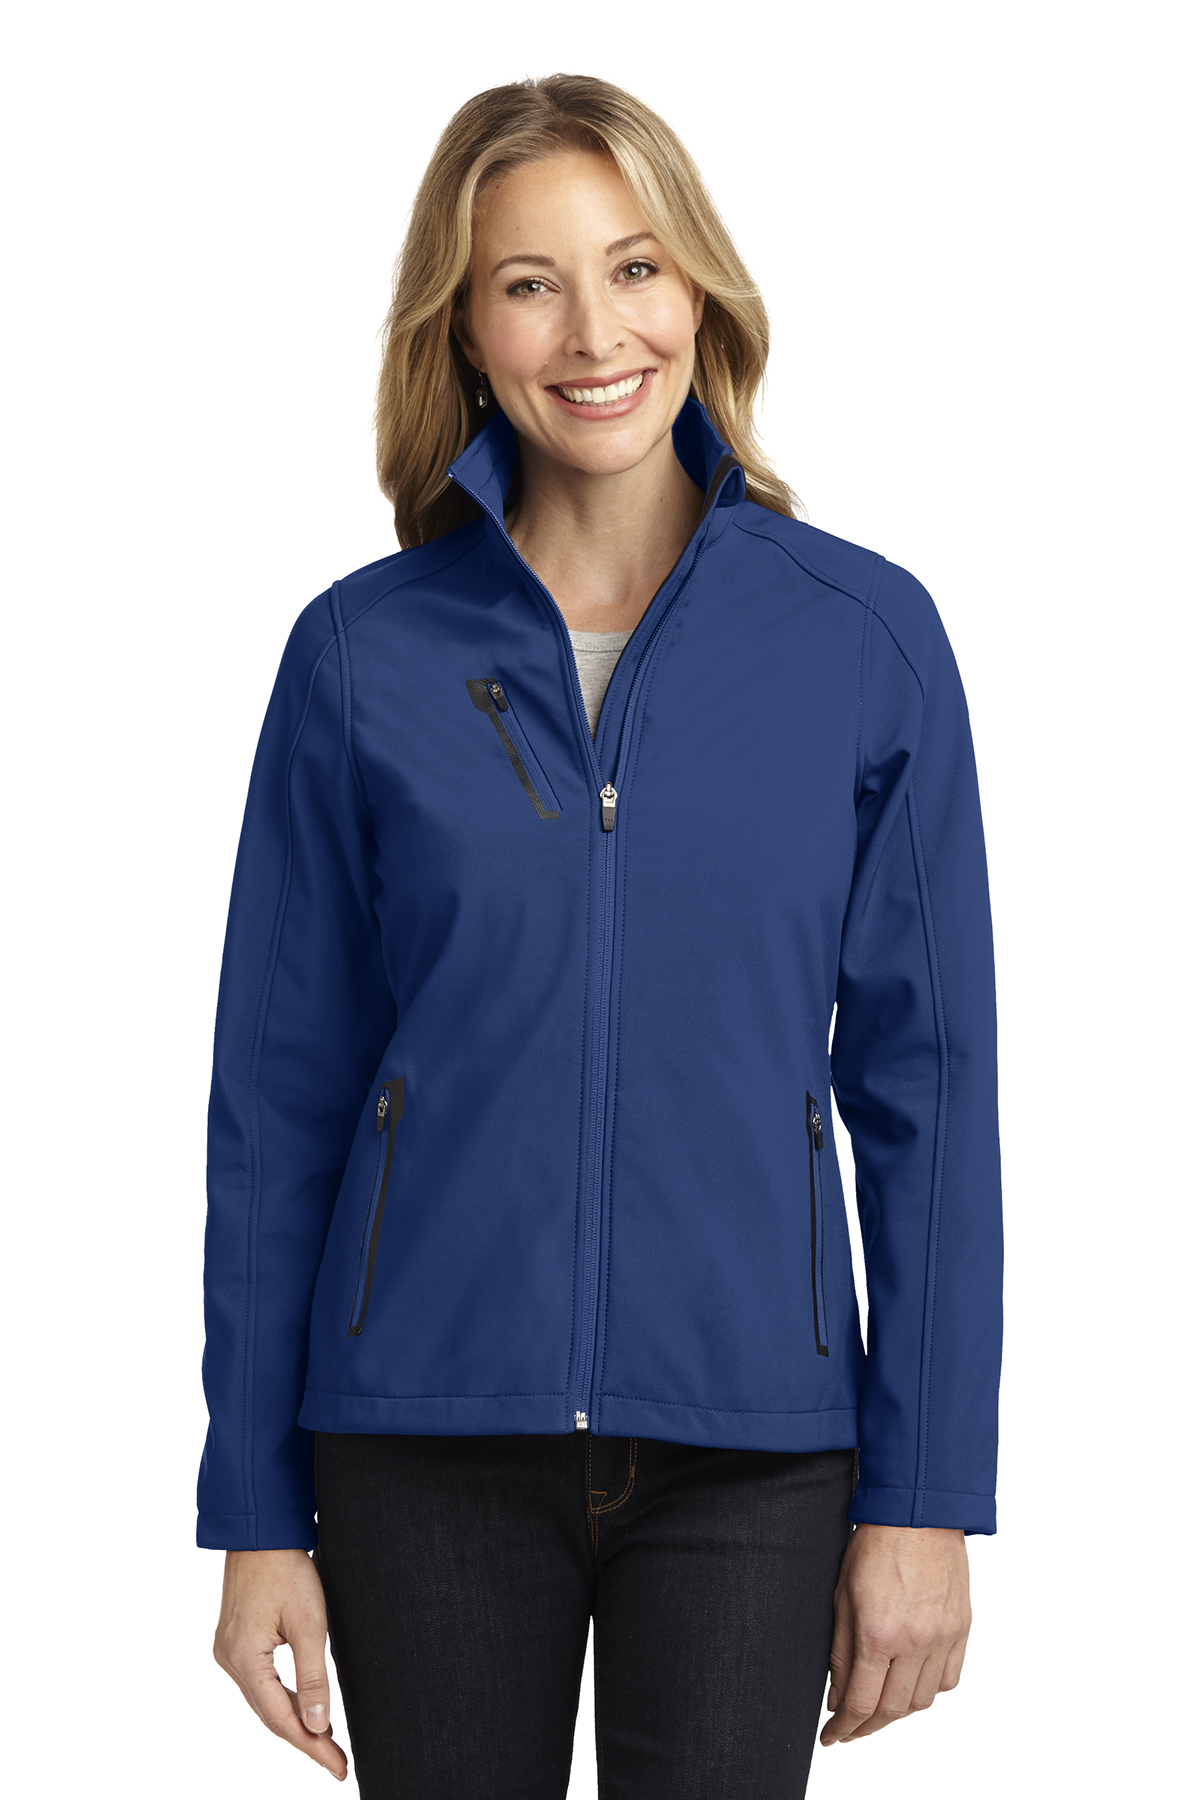 Port Authority L324 Ladies Welded Soft Shell Jacket - Outerwear